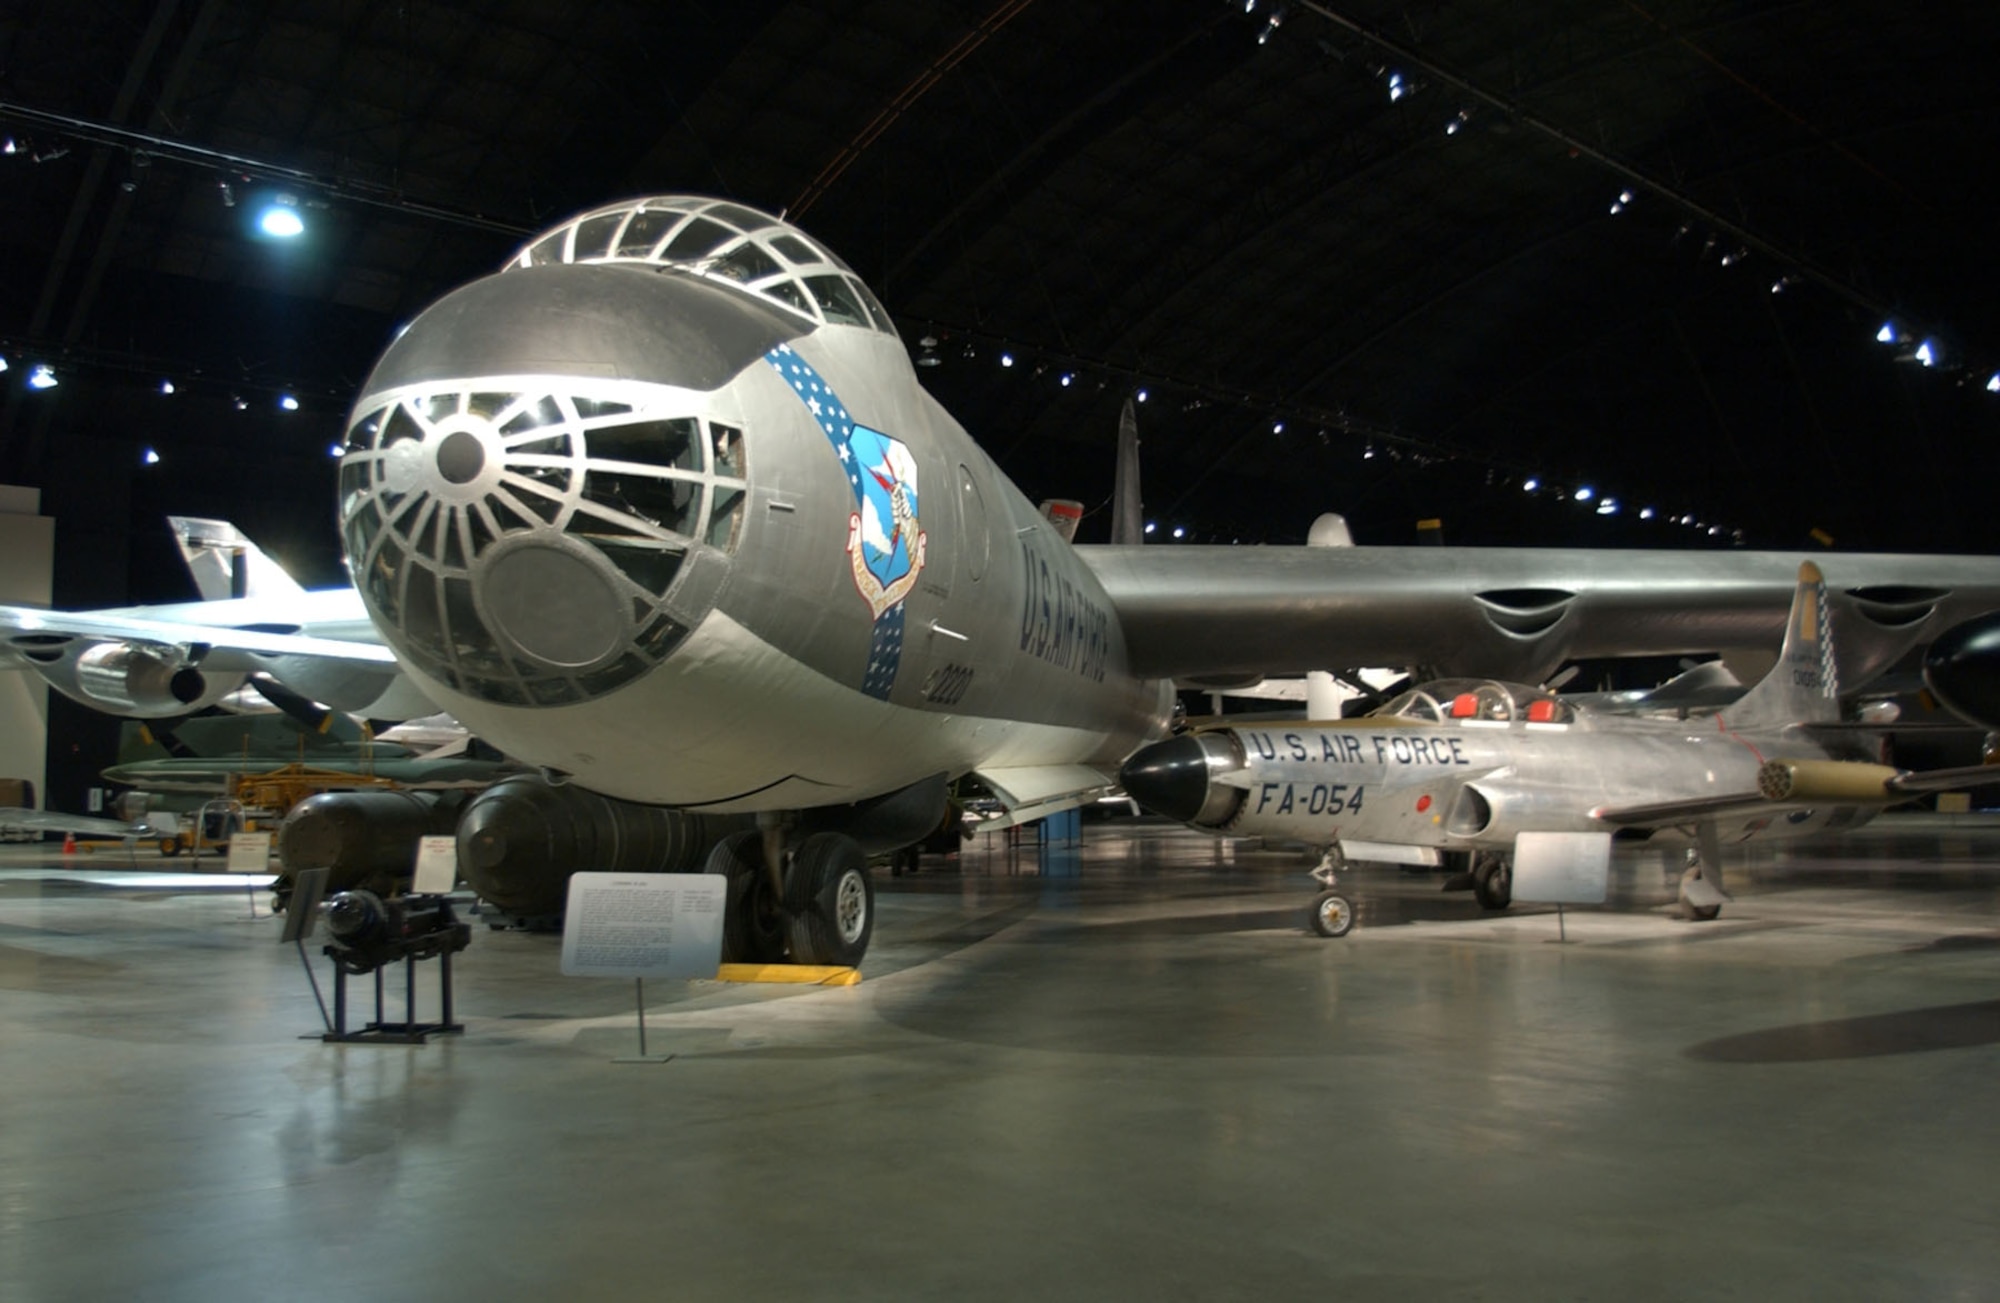 DAYTON, Ohio -- Convair B-36J Peacemaker in the Cold War Gallery at the National Museum of the United States Air Force. (U.S. Air Force photo)